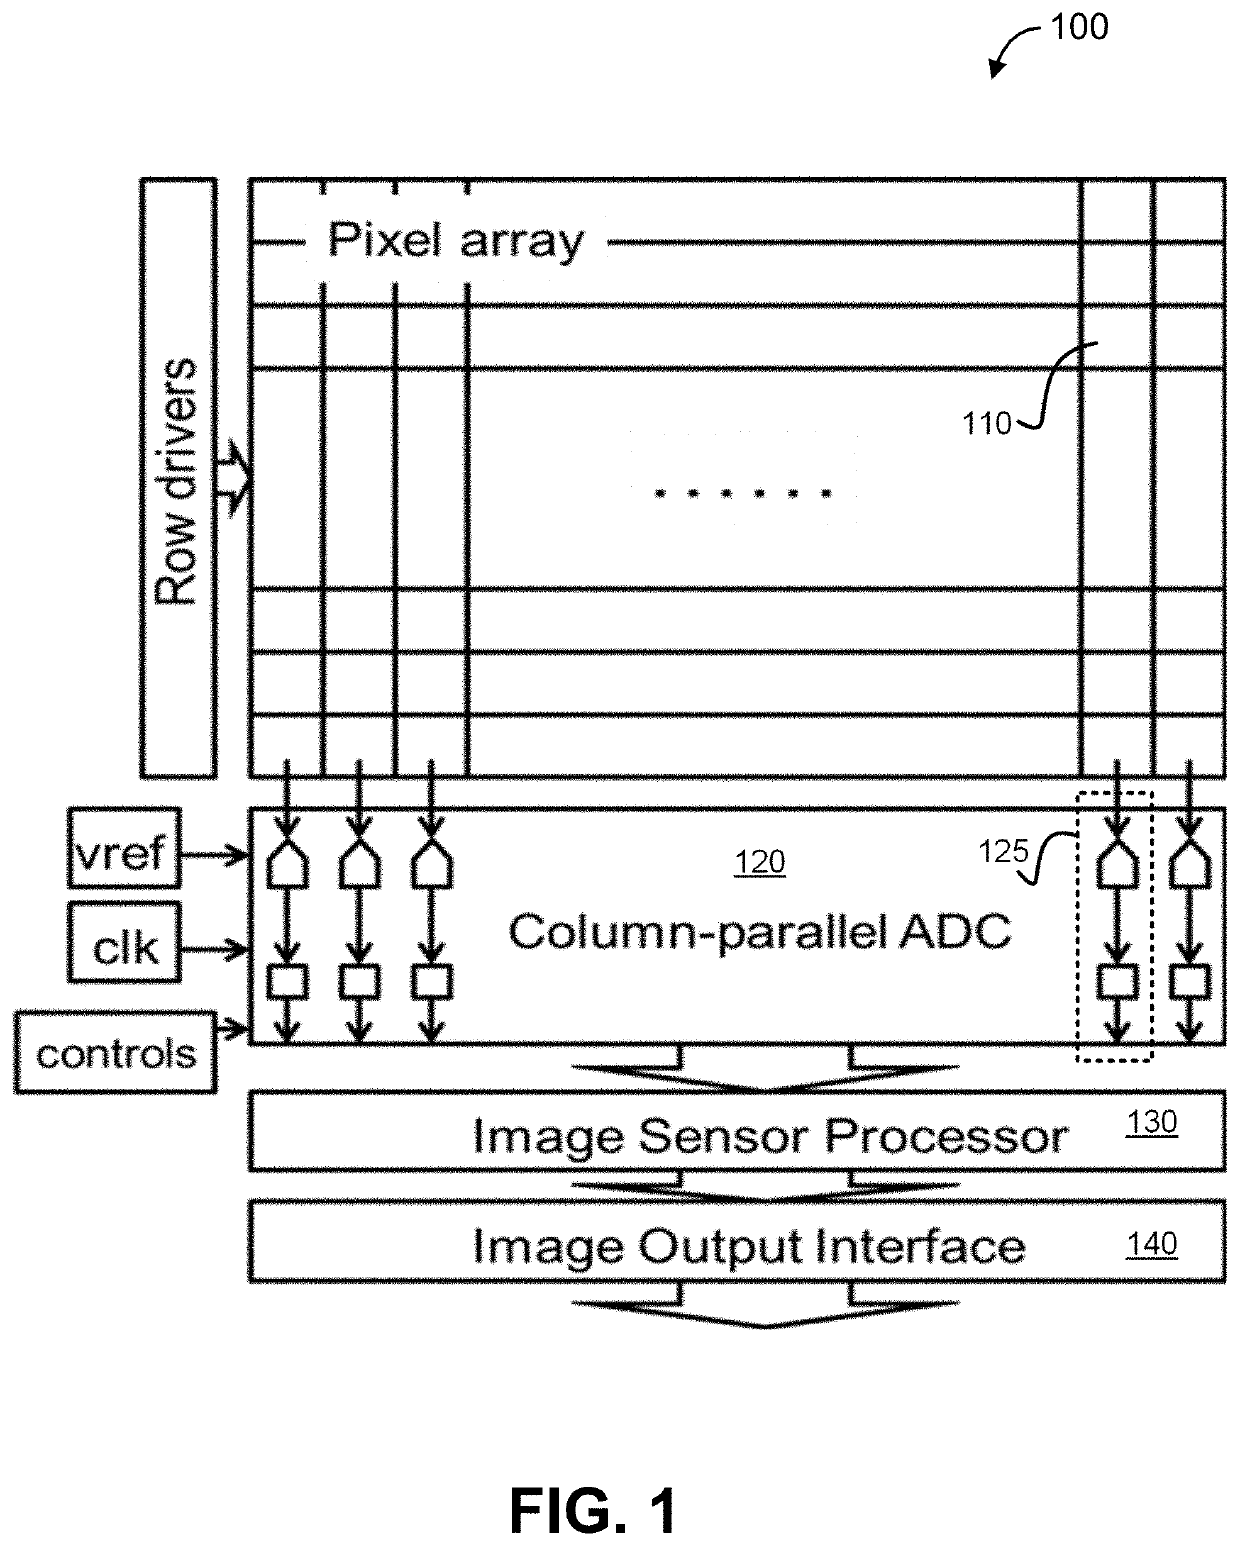 Reduction of fixed-pattern noise in digital image sensors by mitigating gain mismatch error